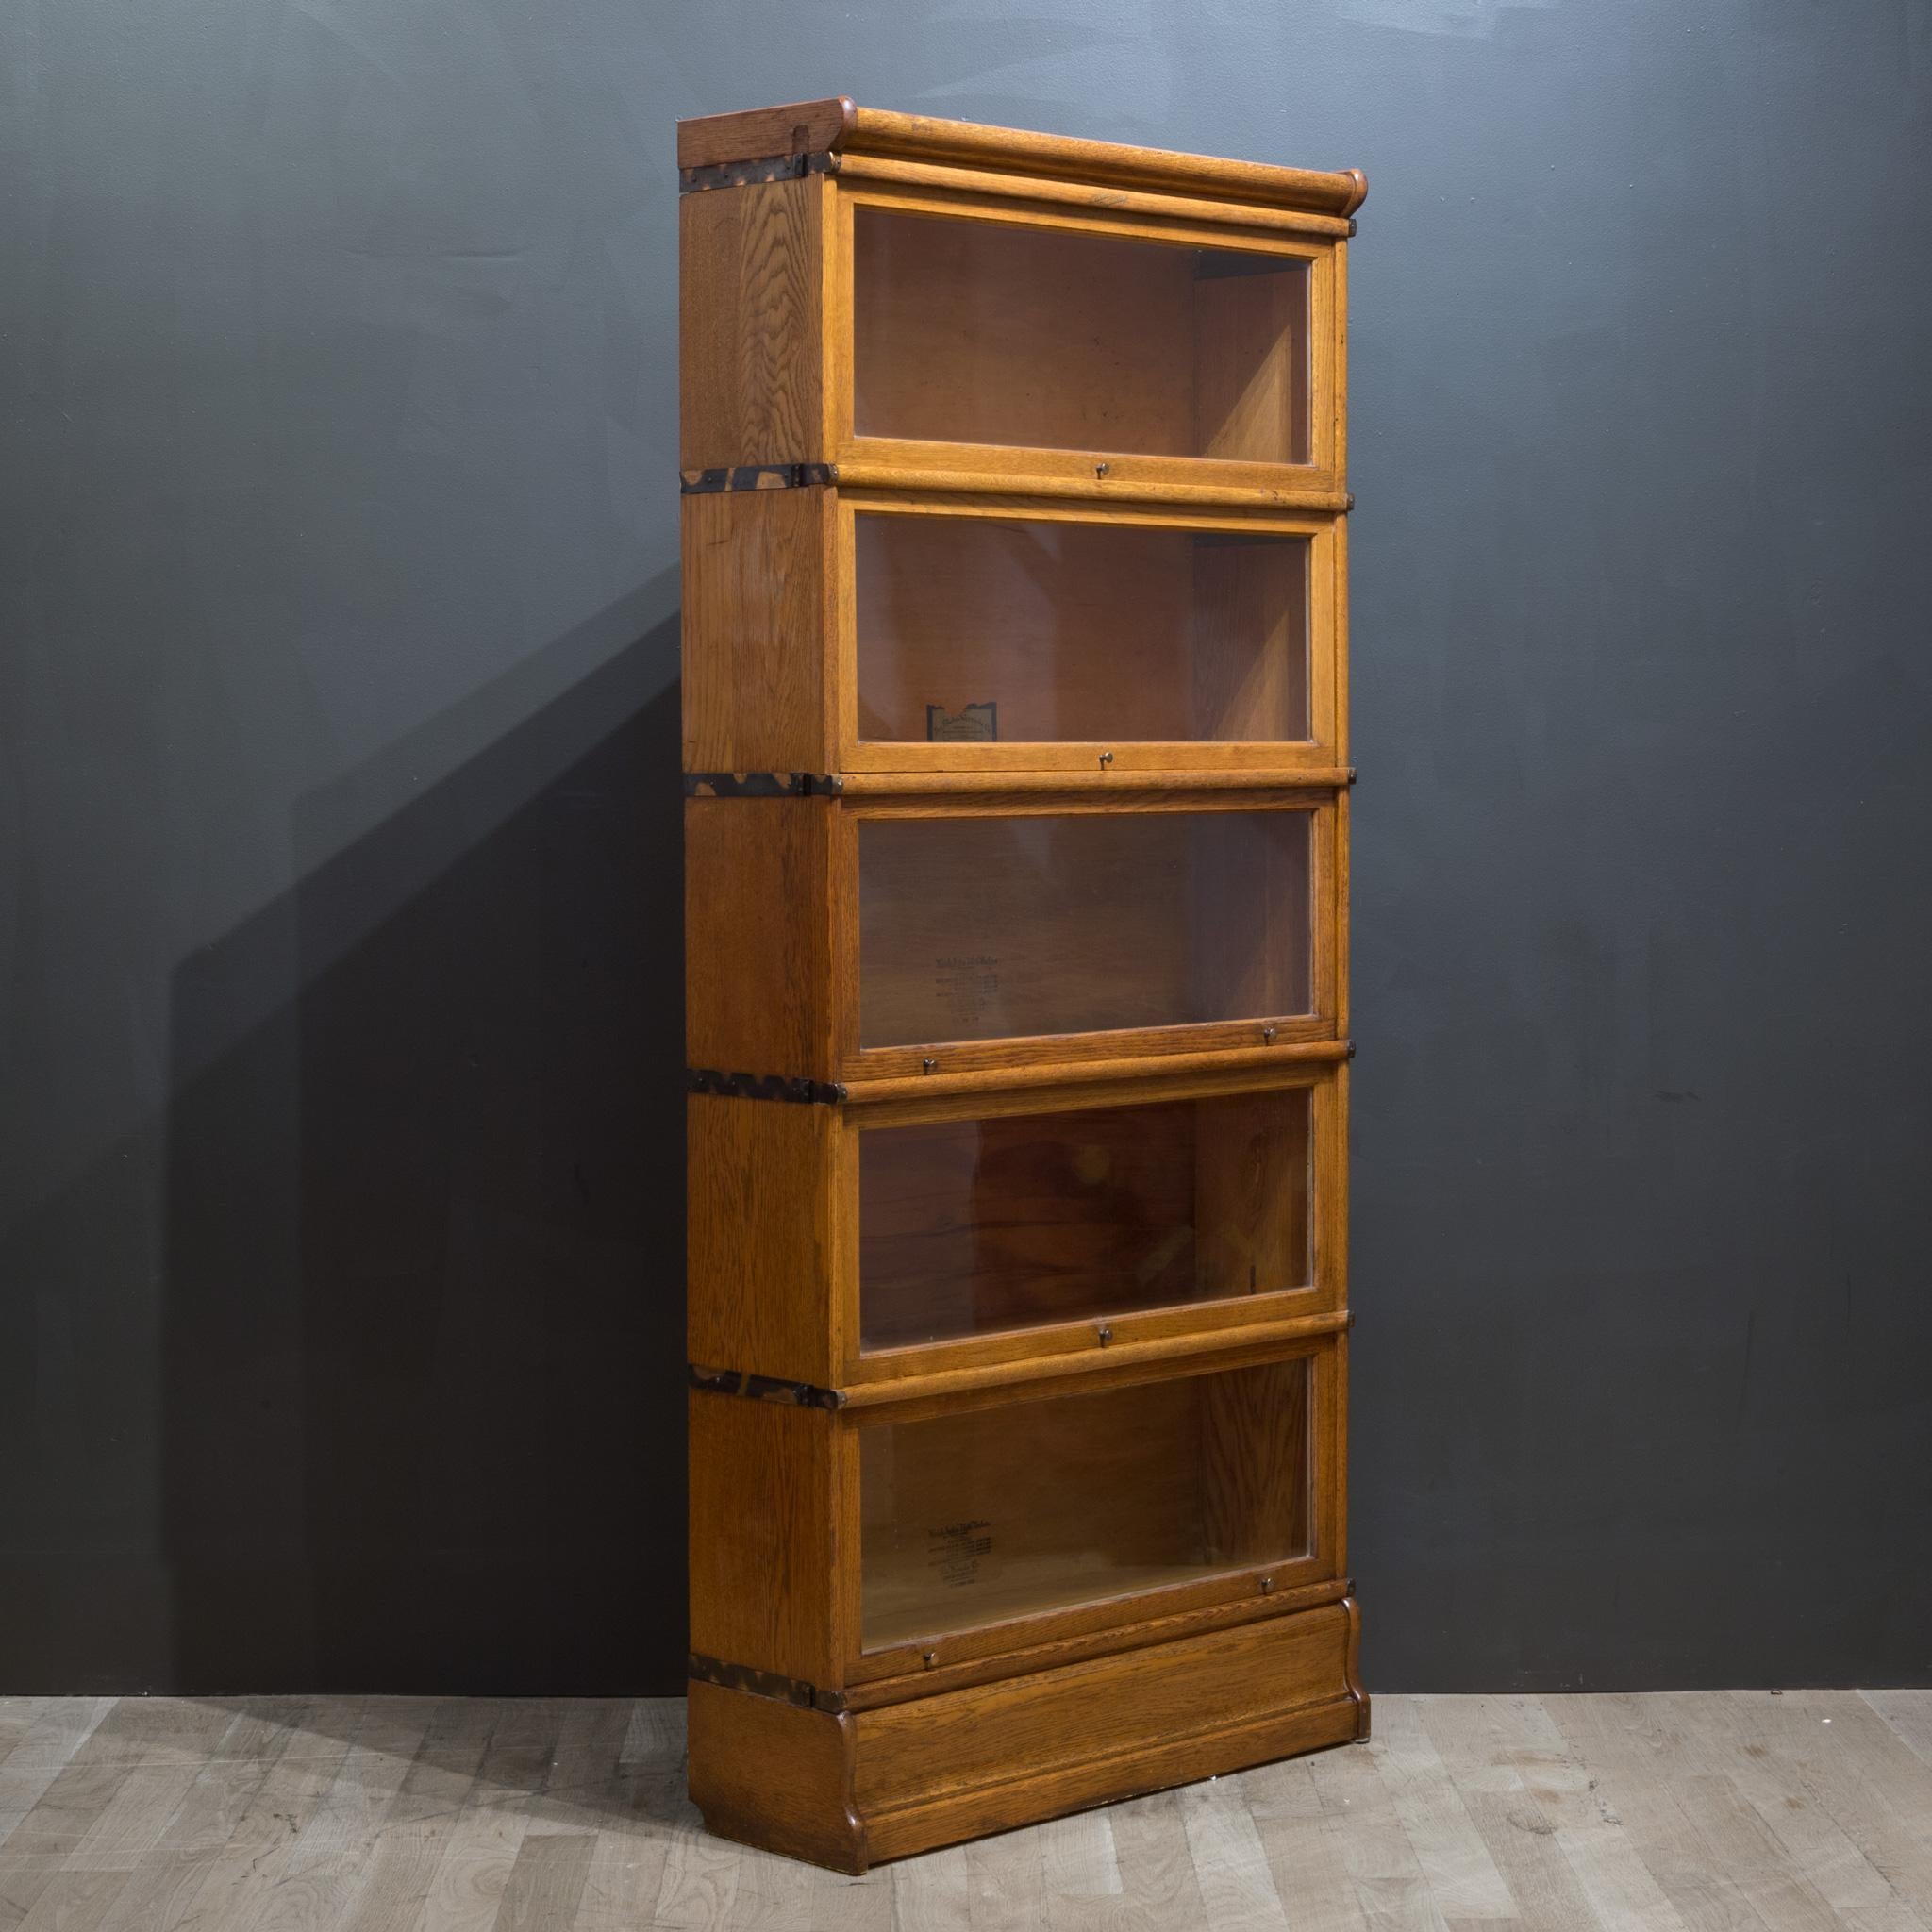 Late Victorian Early 20th C. Globe-Wernicke 5 Stack Lawyer's Bookcase c.1890 For Sale